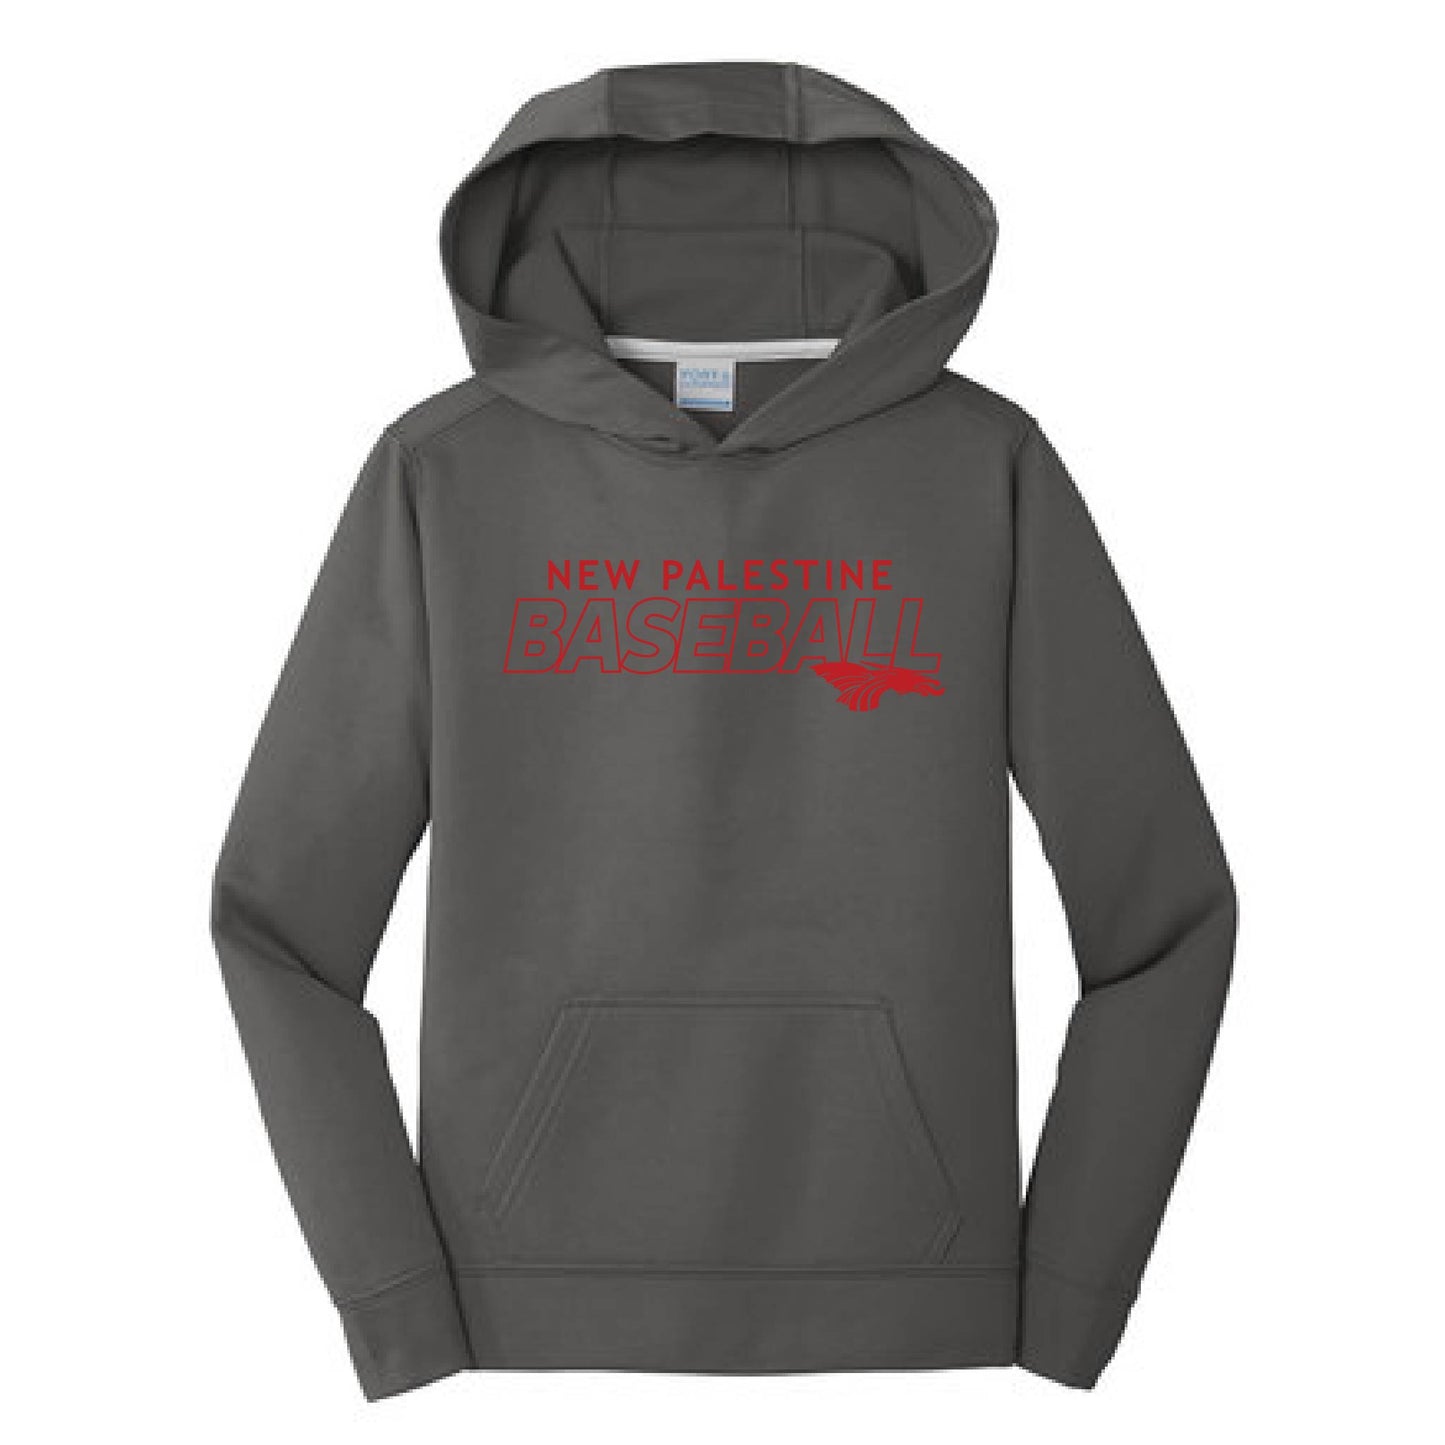 Unisex Hoodie - NP Baseball Outlined